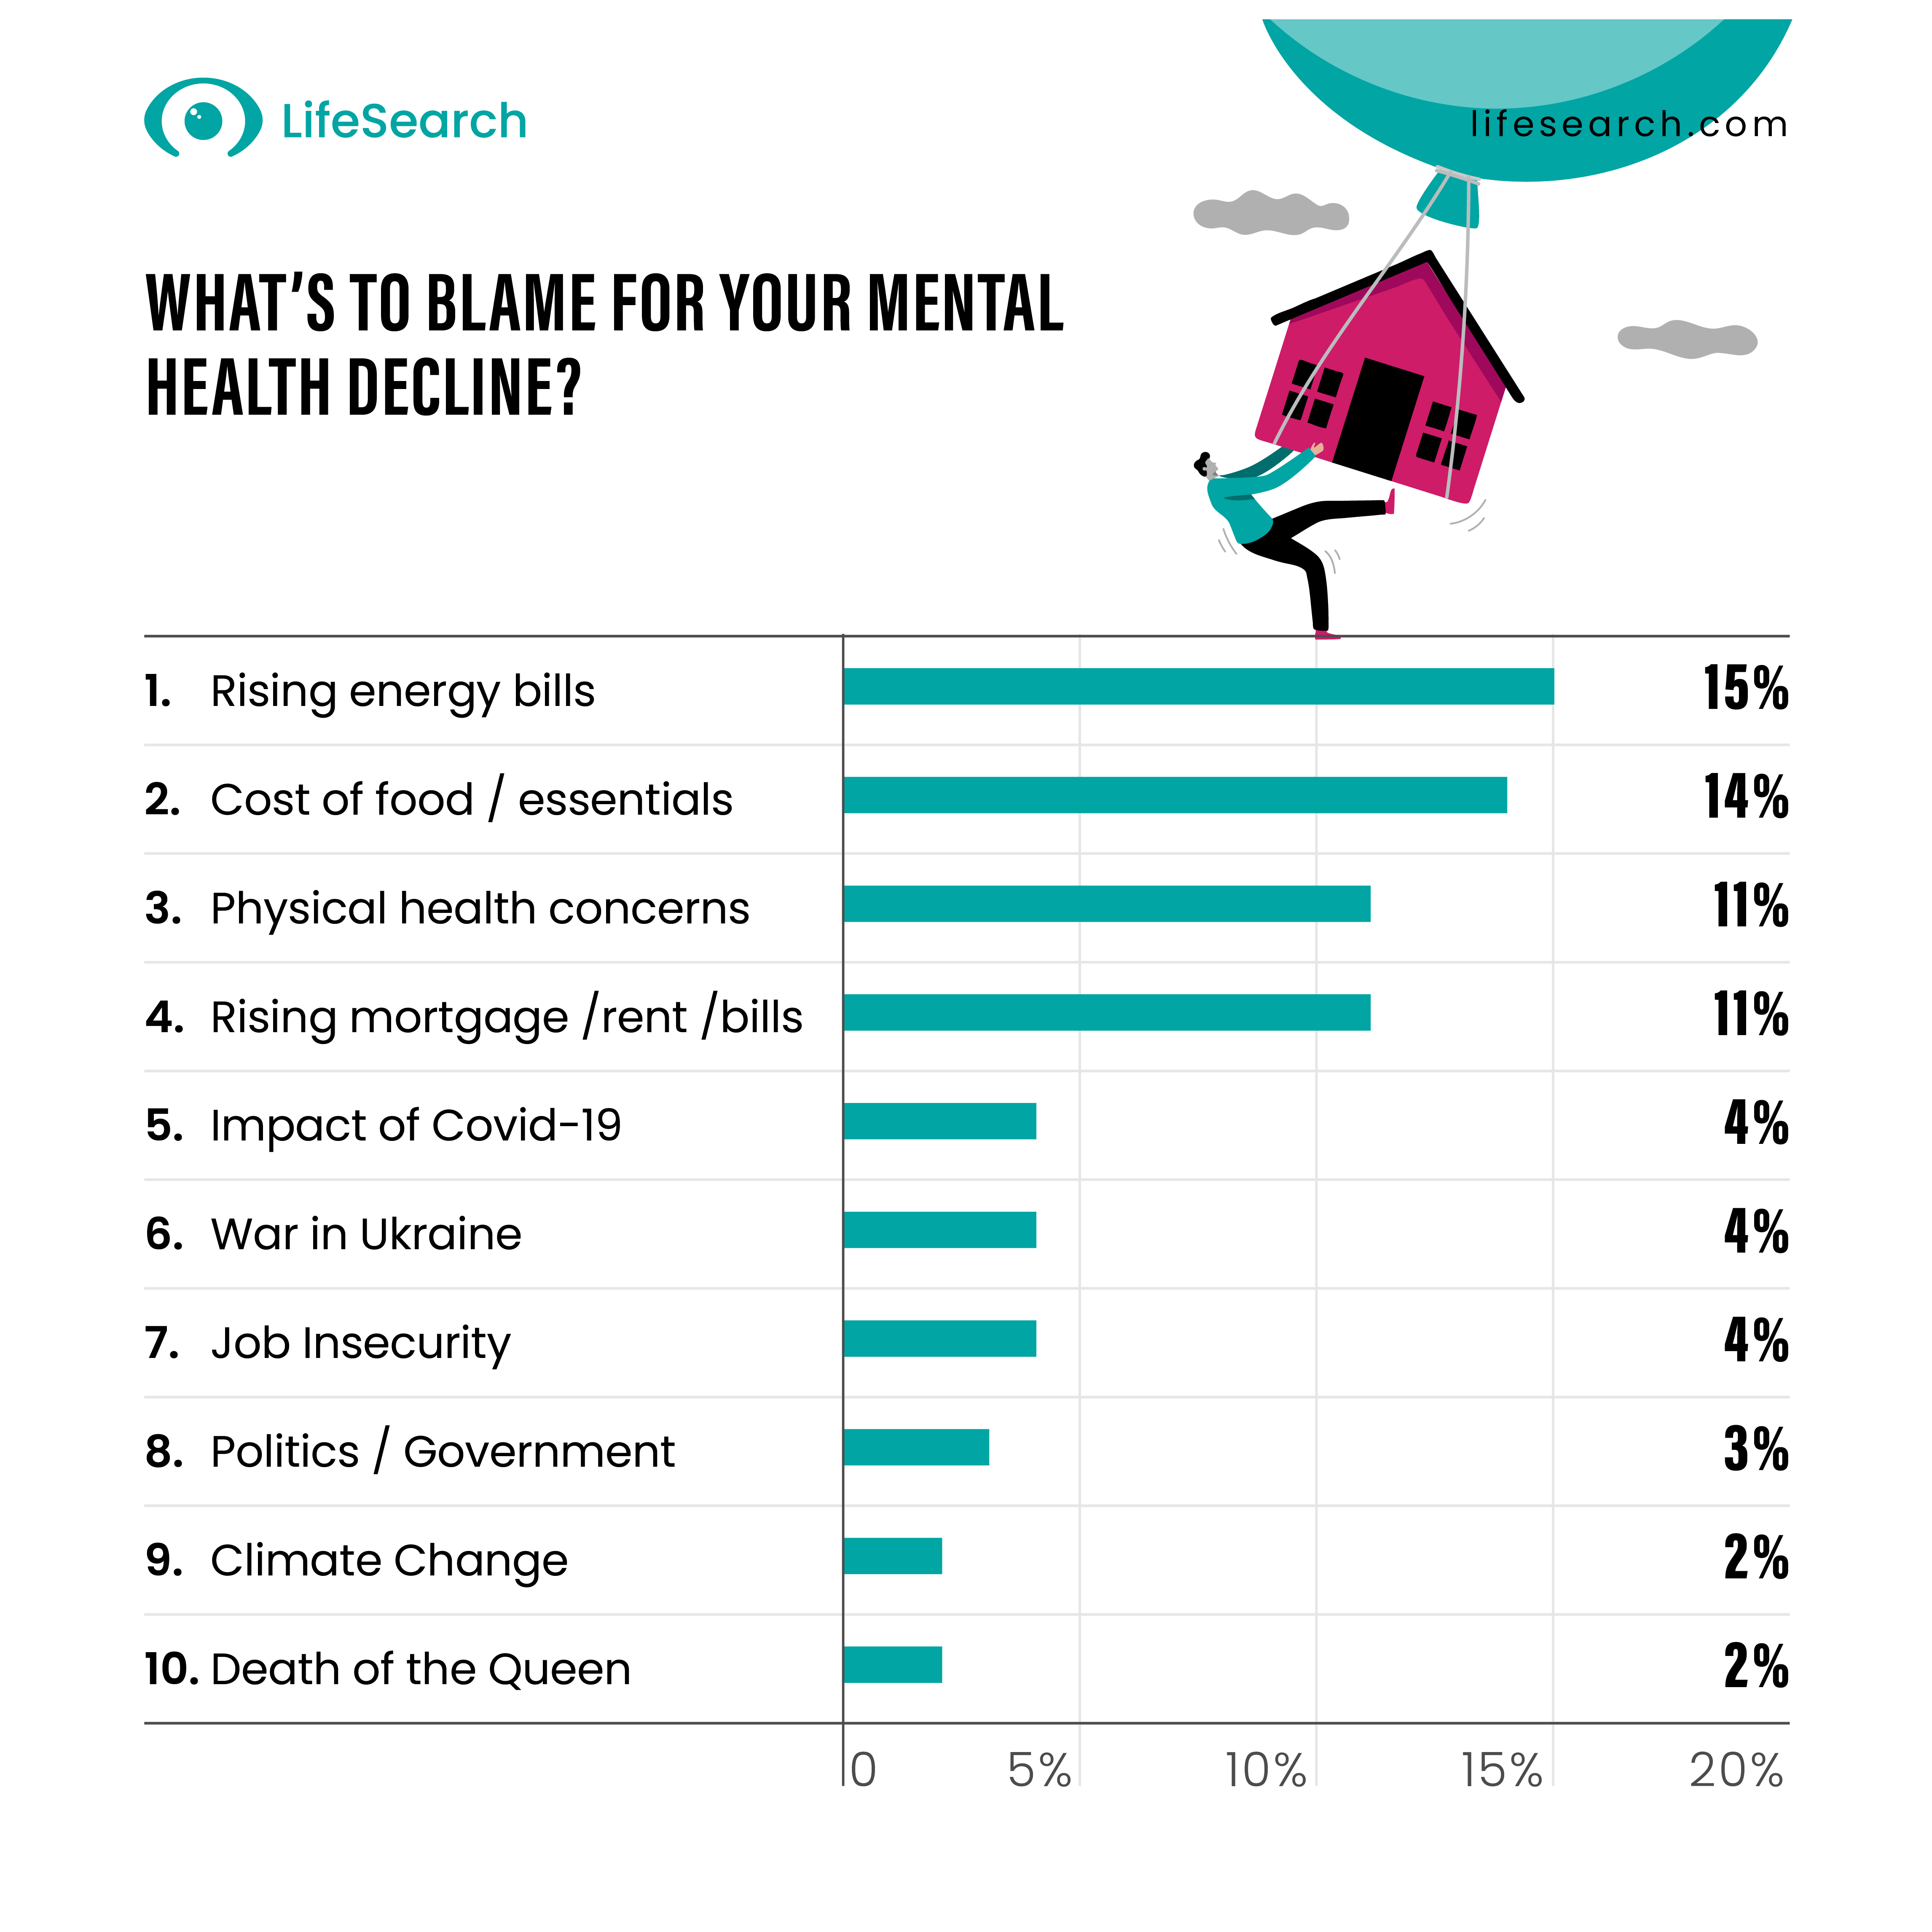 Table showing what is to blame for mental heaklh decline by percentage